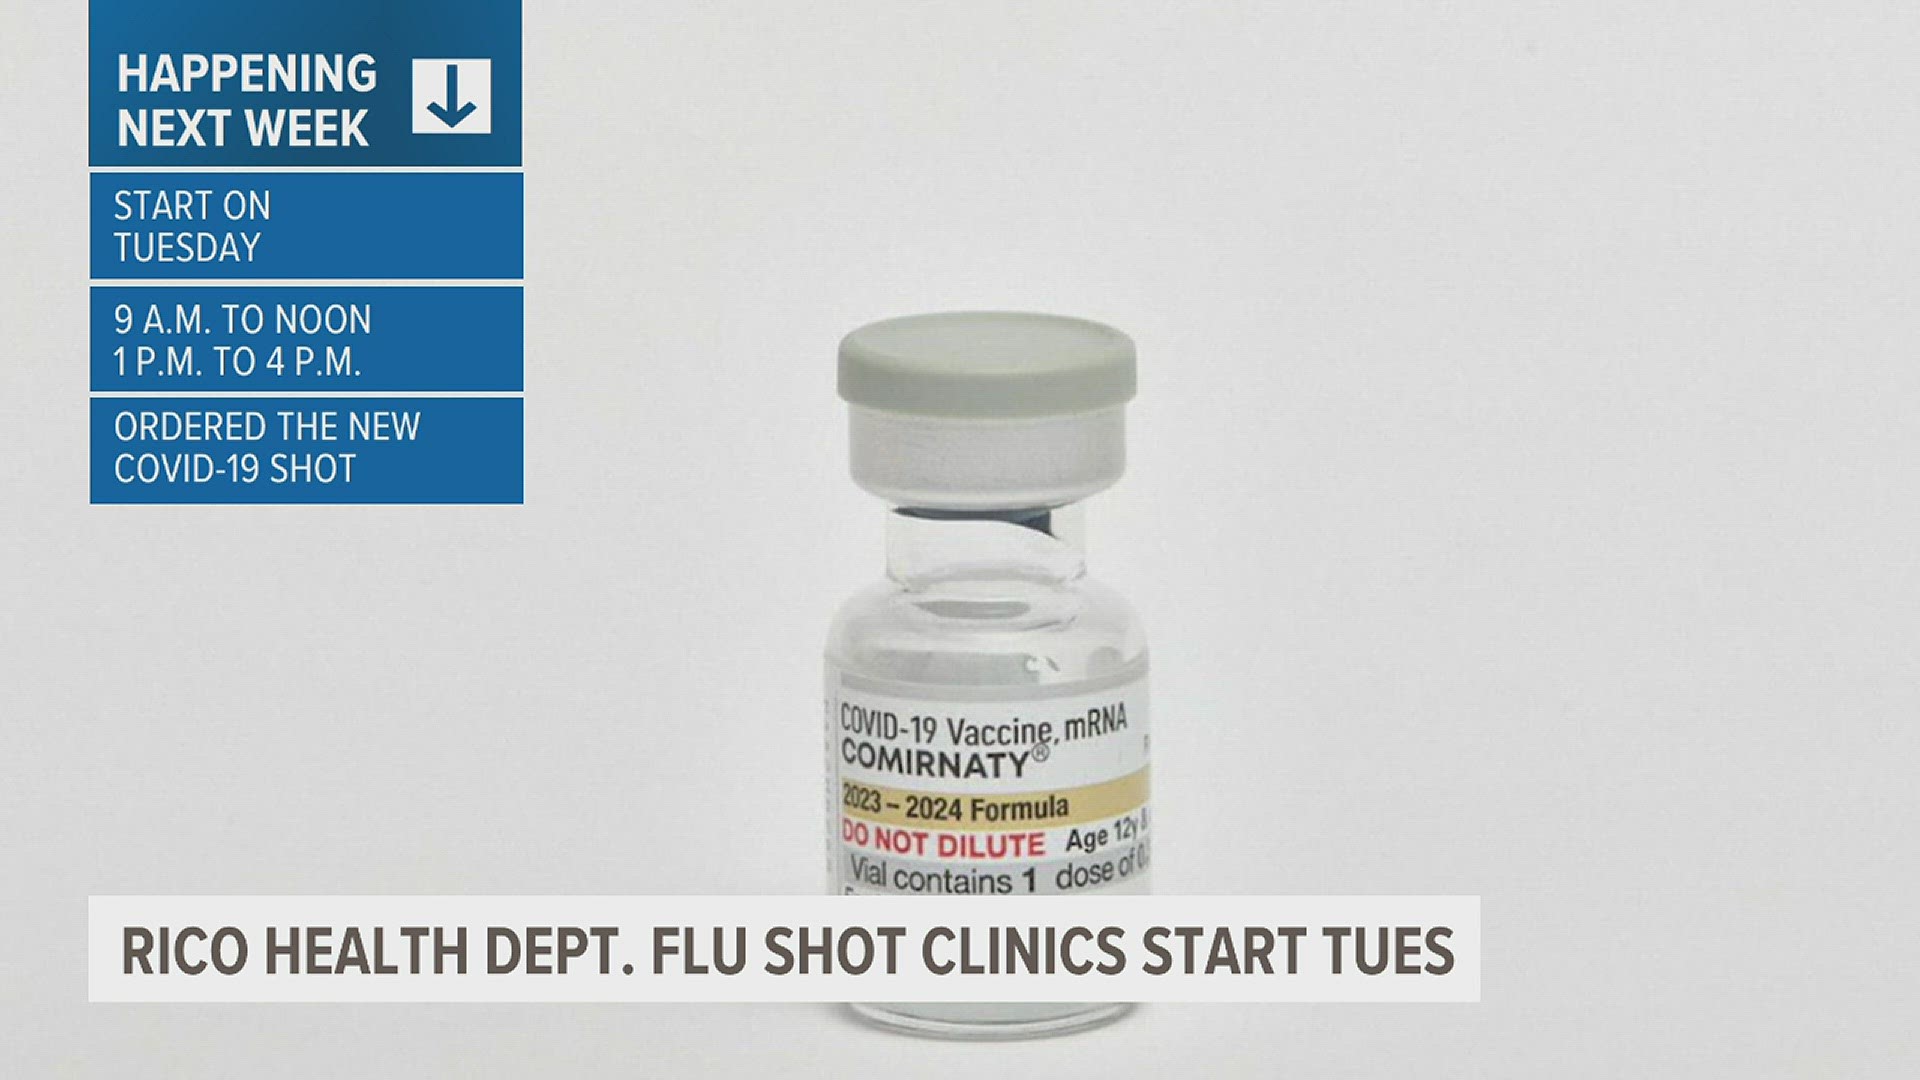 Starting next Tuesday the Rock Island County Health Department will administer annual flu shots, and has ordered new COVID boosters vaccines.